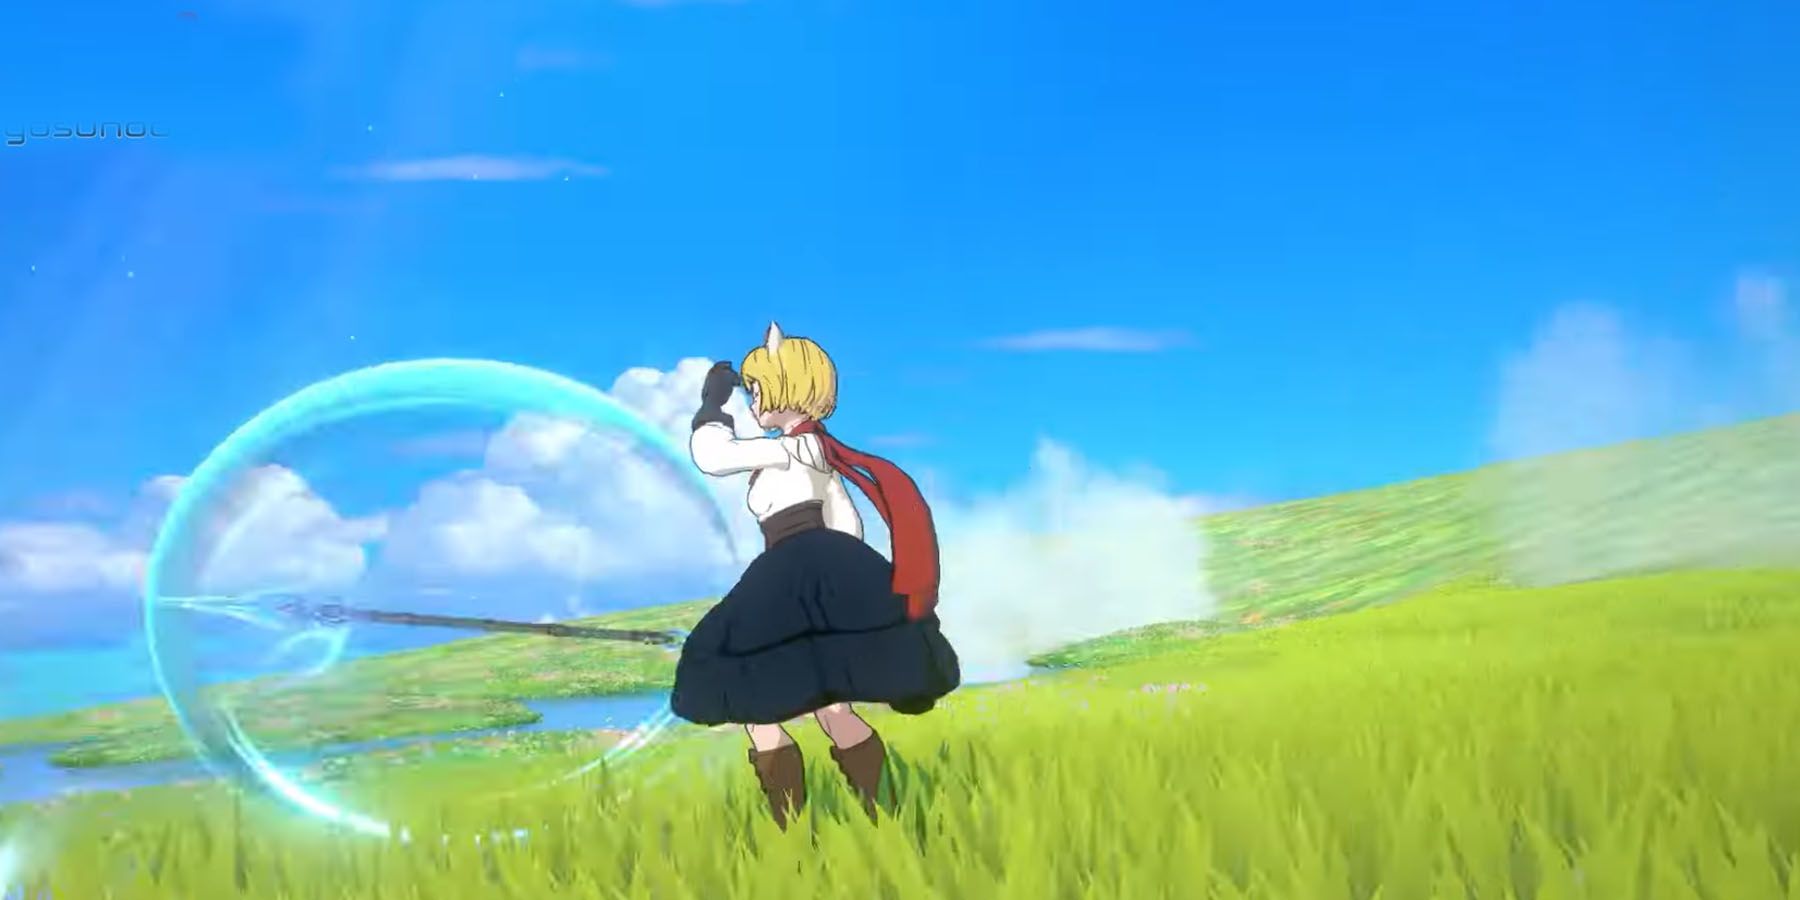 The Witch in Ni no Kuni: Cross Worlds using her spear